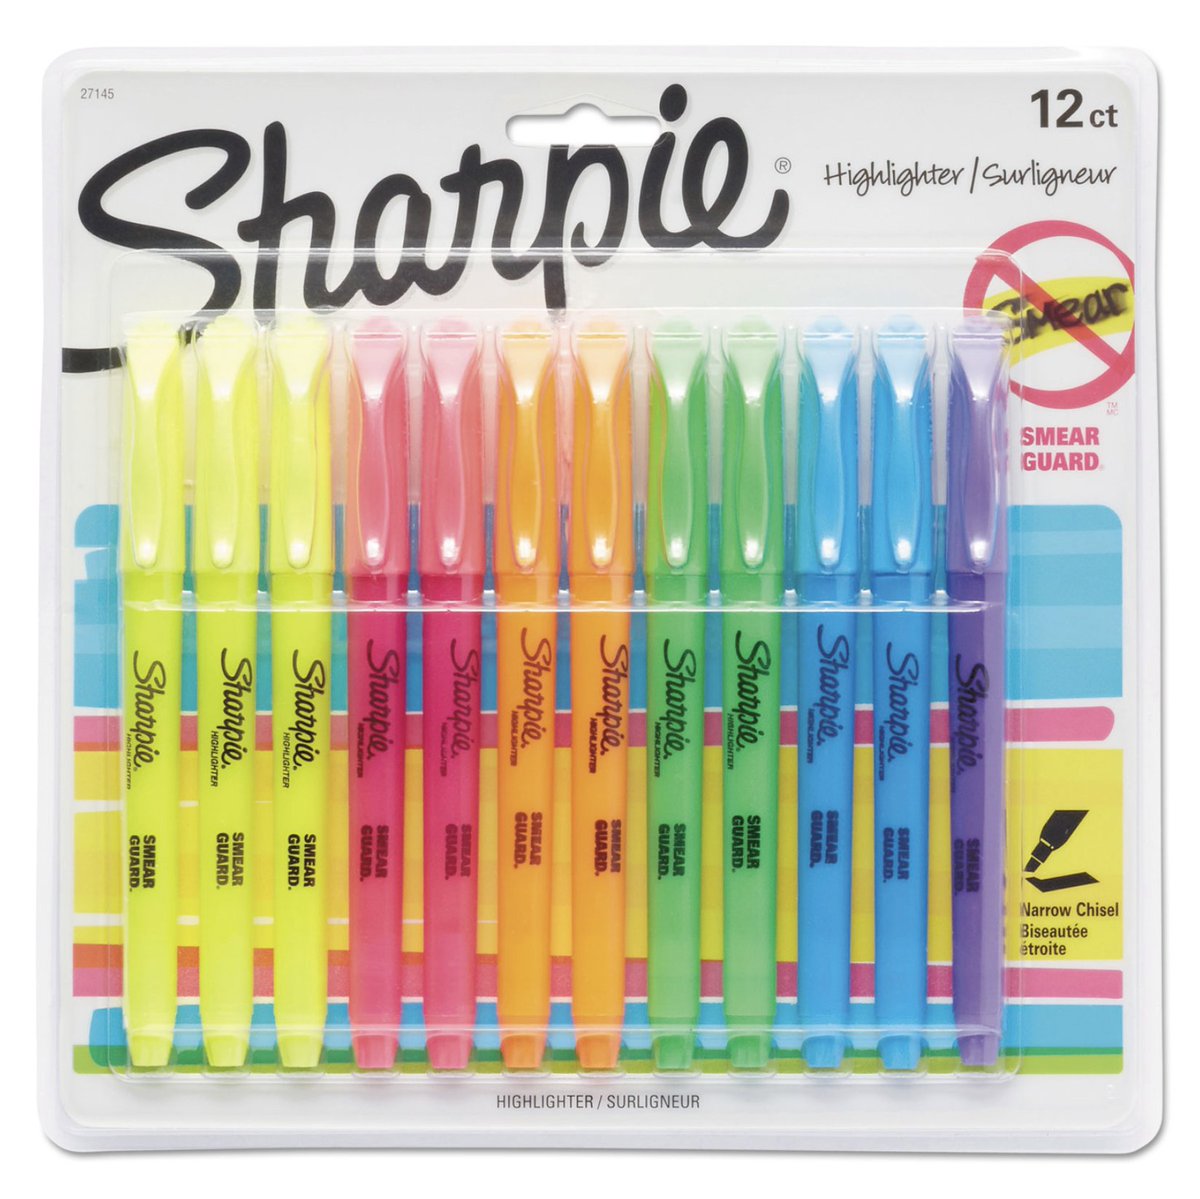 With a name like Sharpie, you know they are good!

Pocket Style Highlighters, Assorted Ink Colors, Chisel Tip, Assorted Barrel Colors, Dozen

#PatrickandCo #PatrickandCompany #officesupplies #SanFrancisco #shoplocal